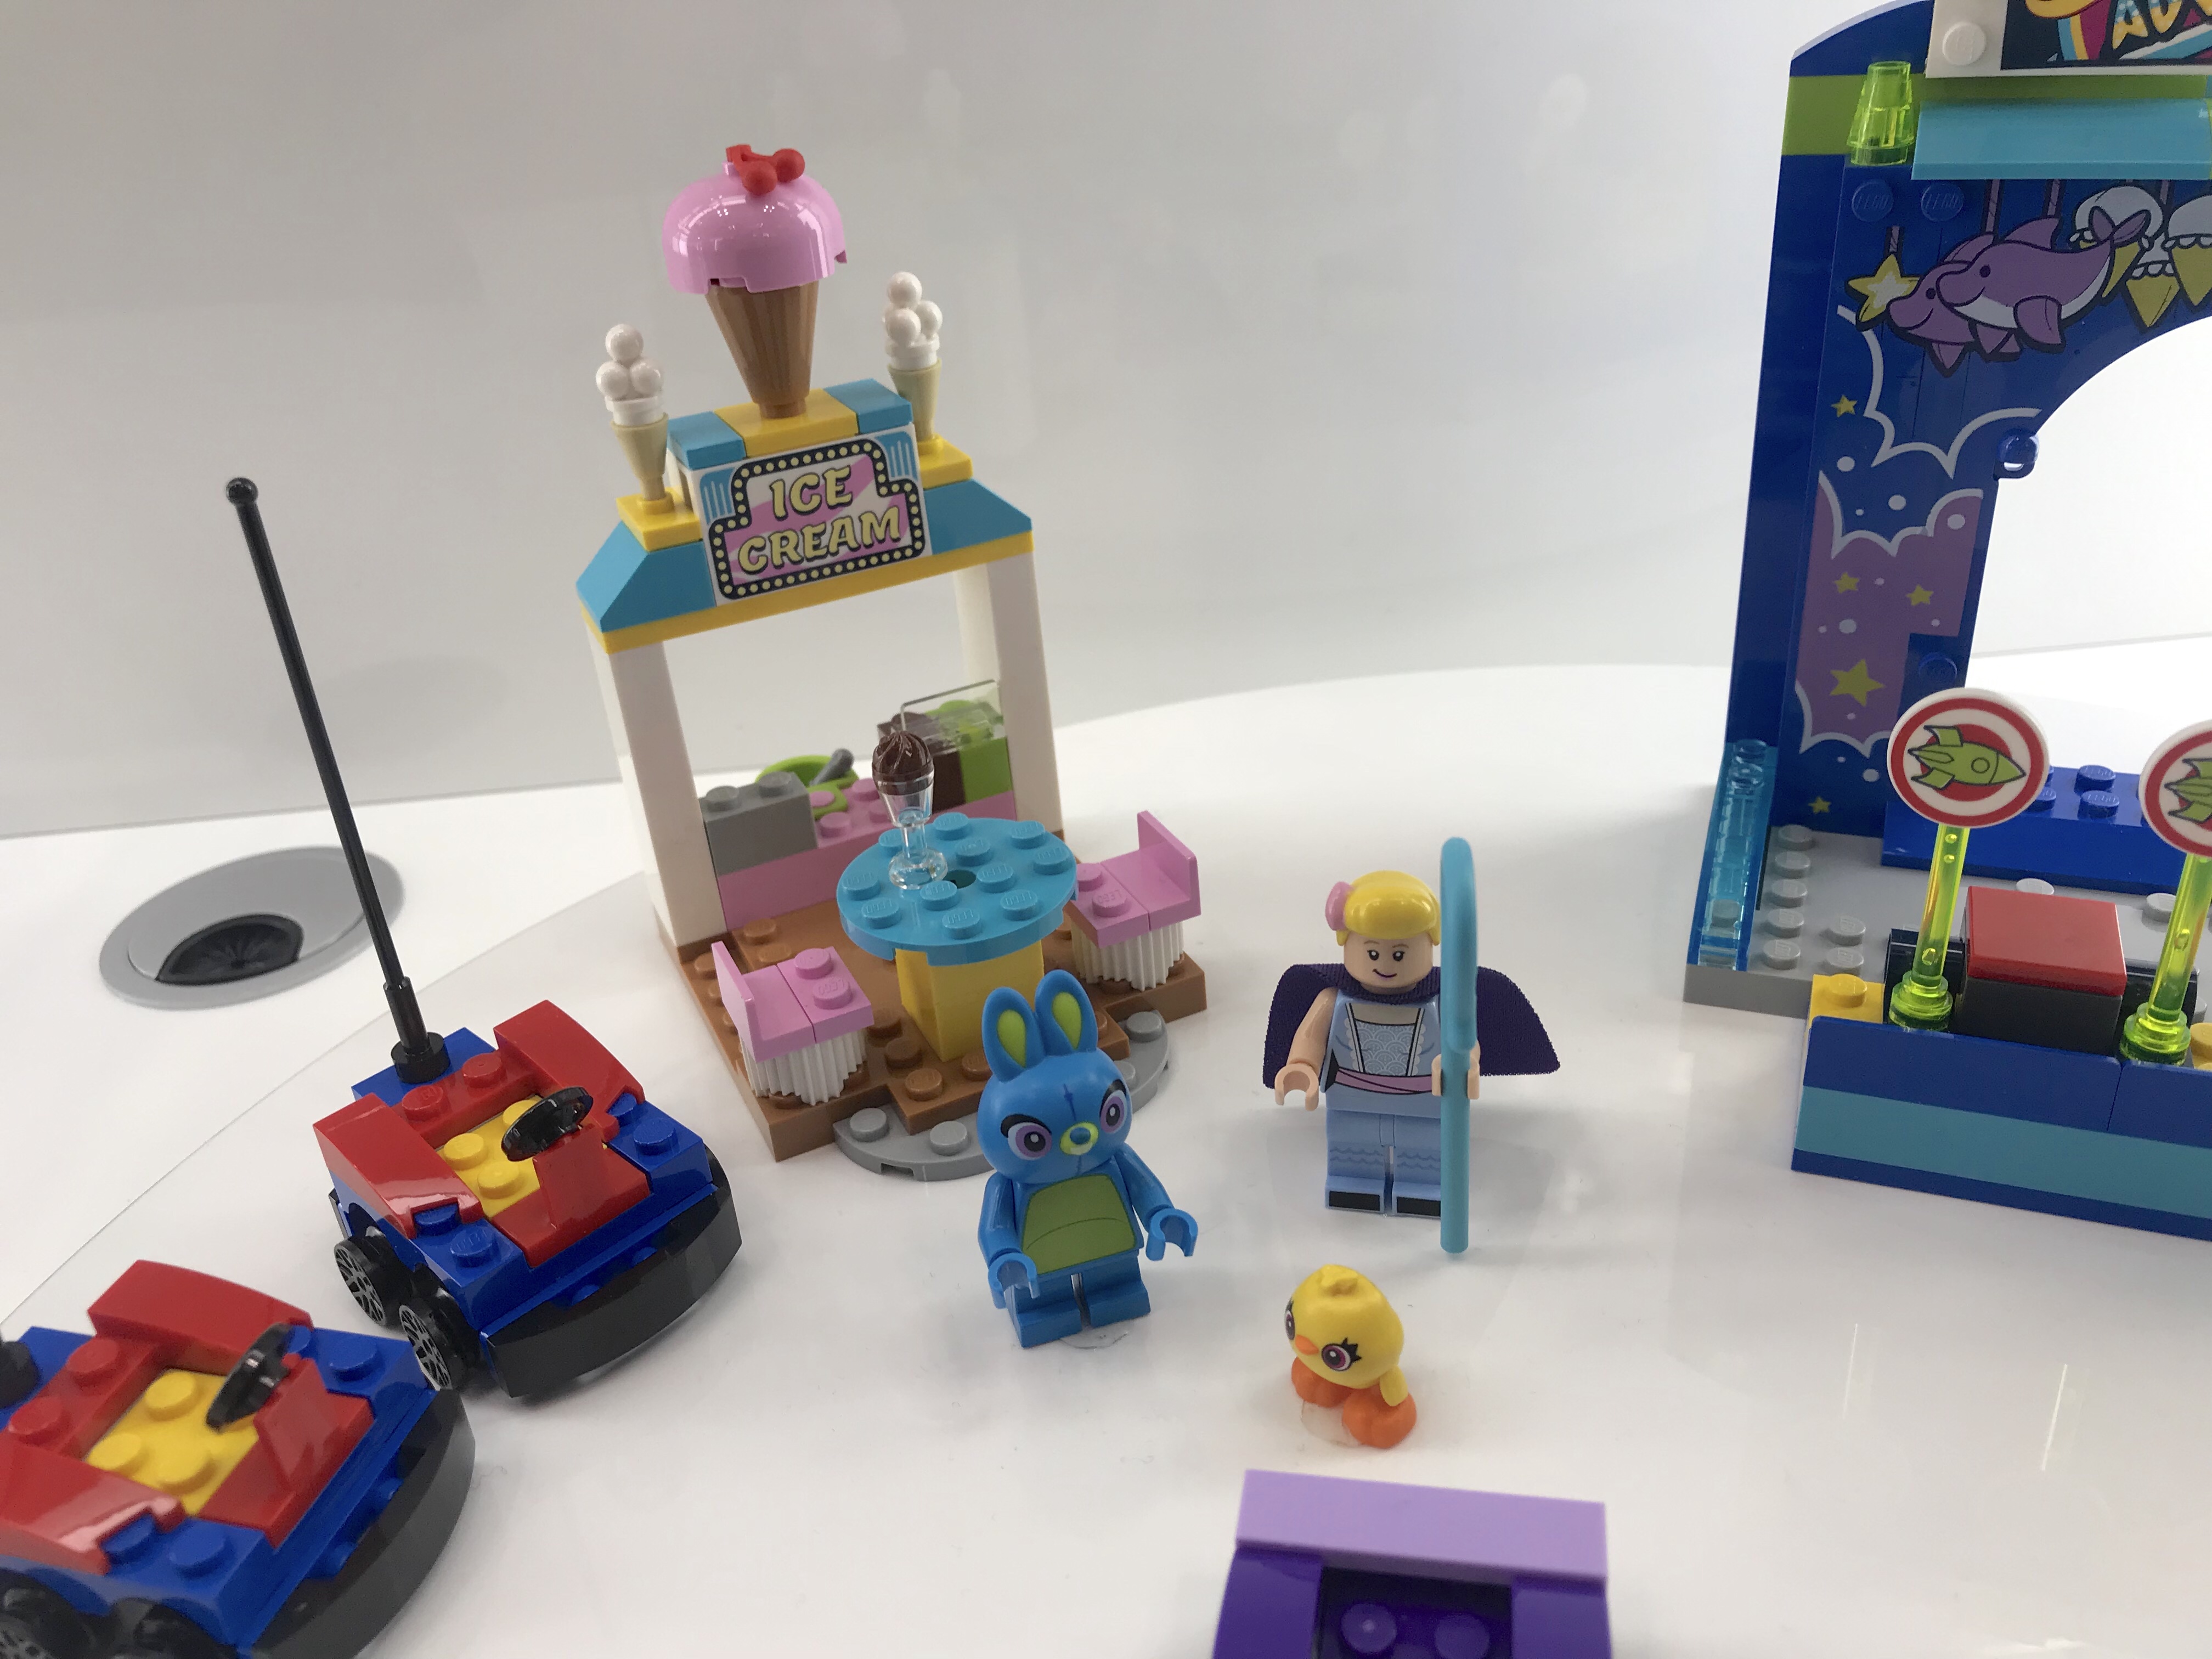 Coming Soon, Toy Story 4 Lego Sets!